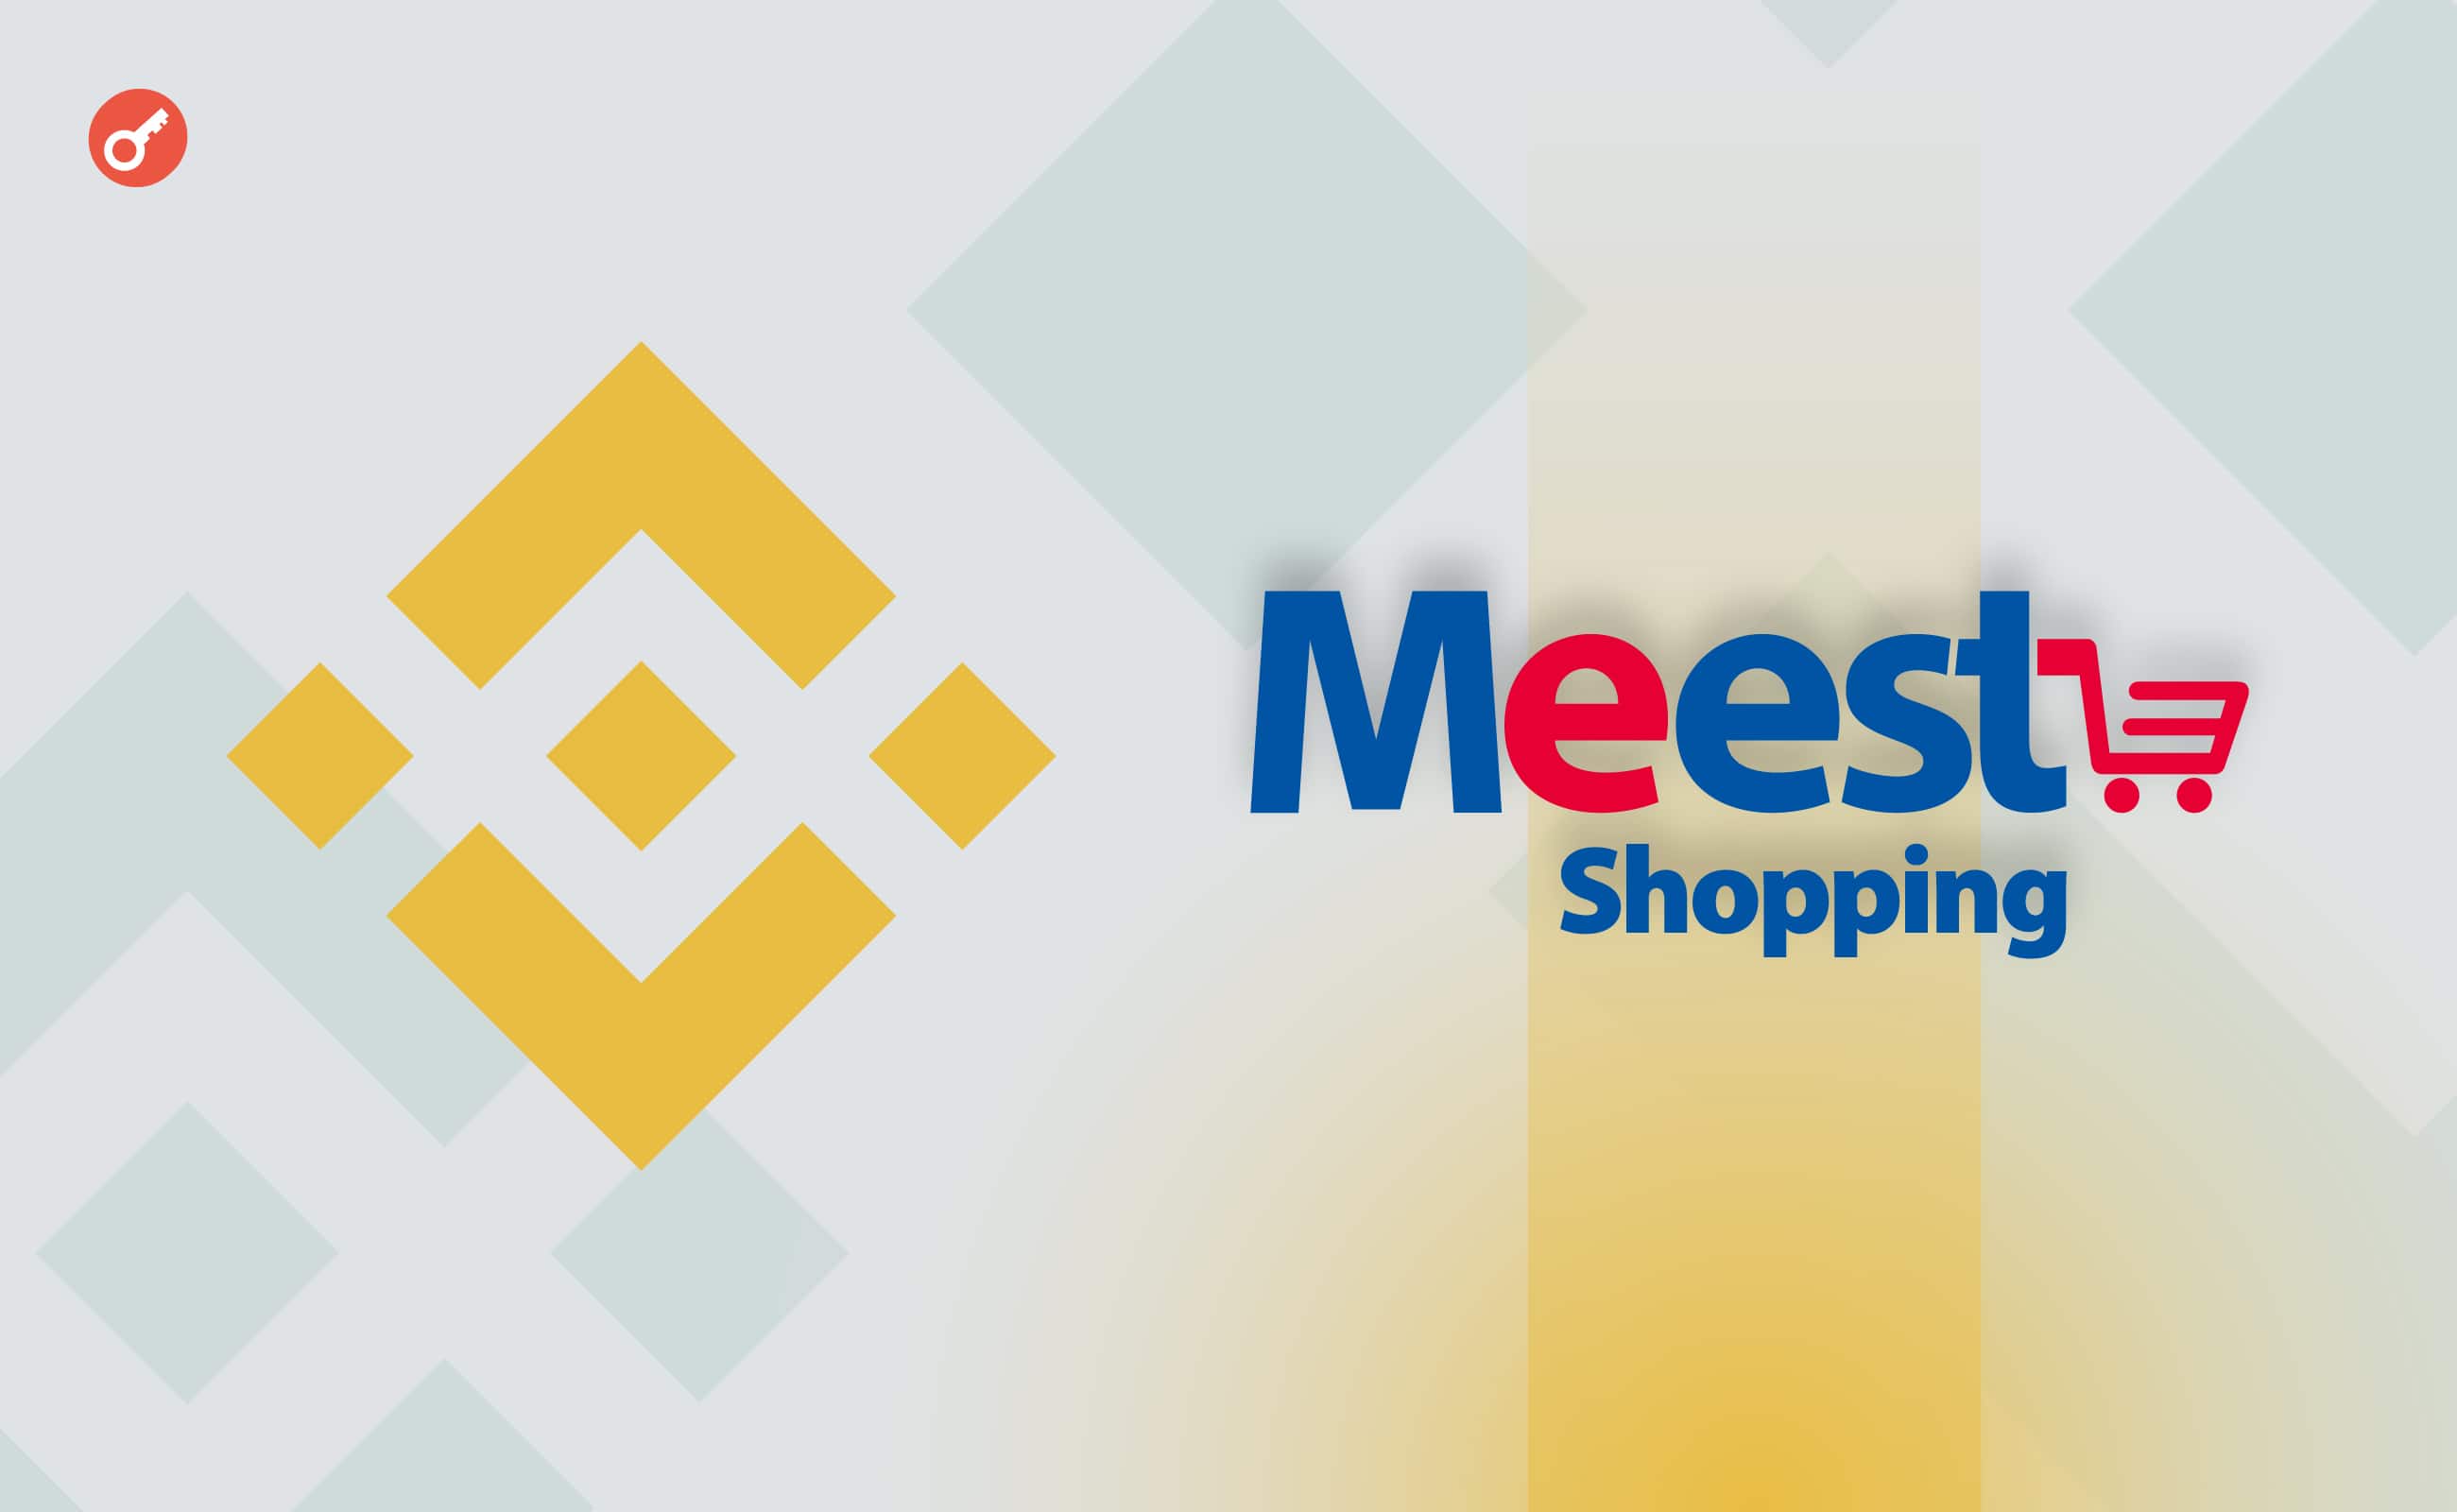 Binance has announced a partnership with the Meest Shopping service